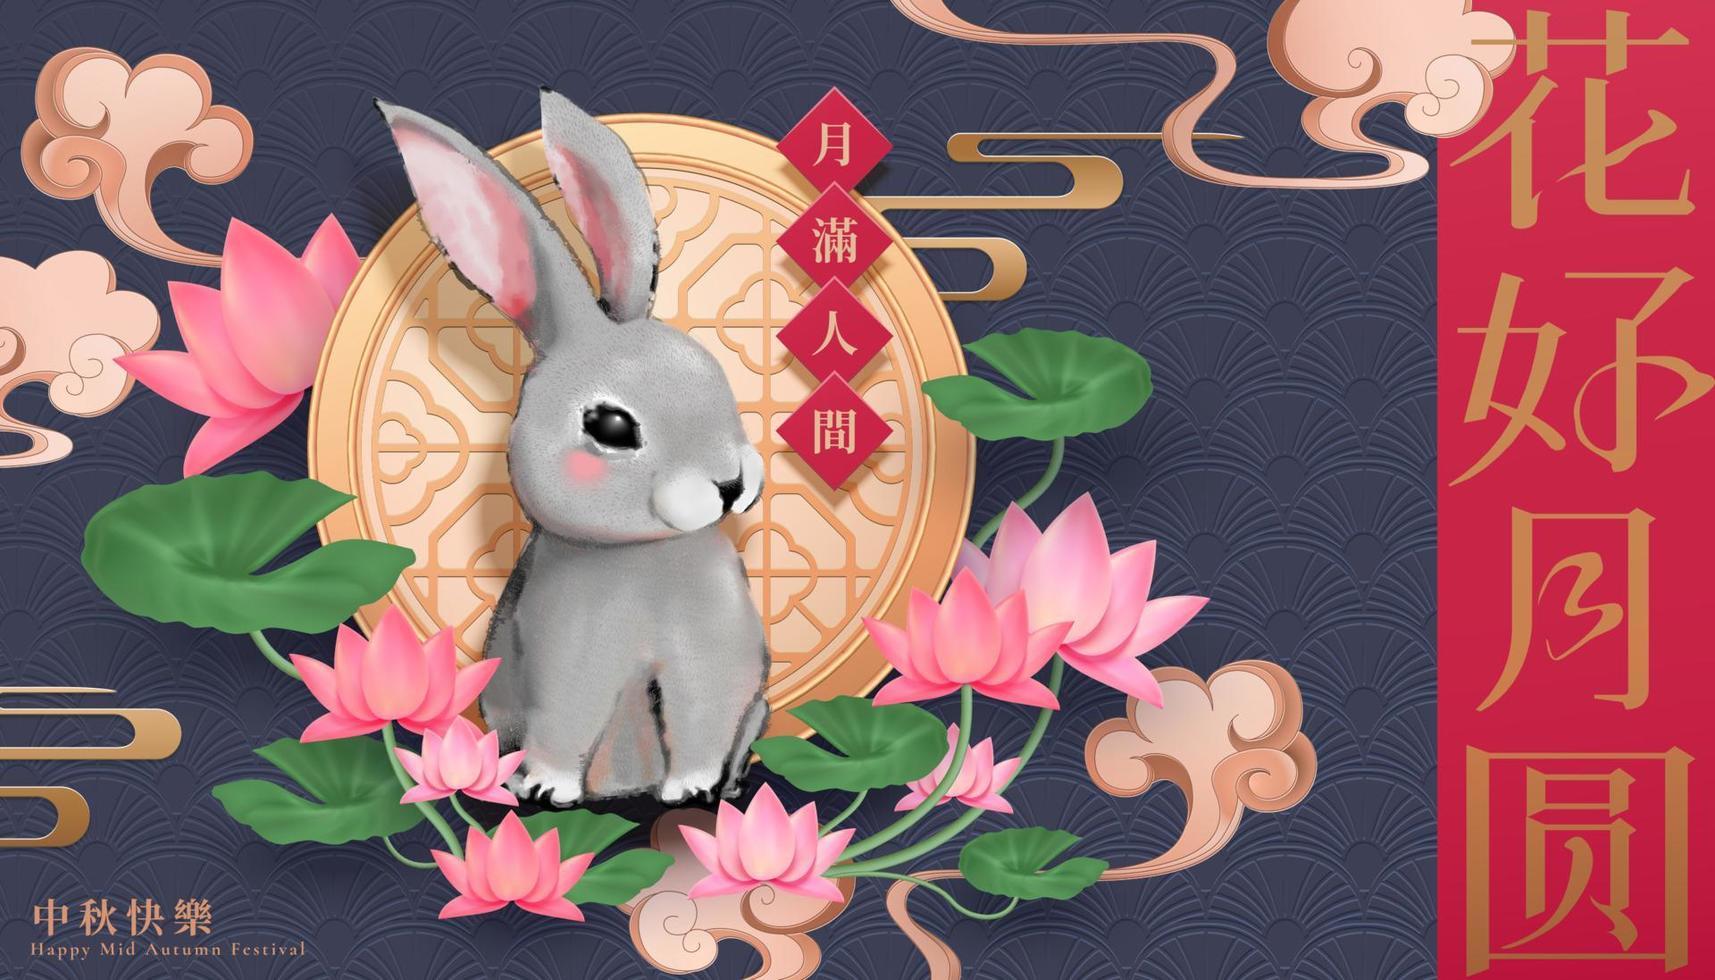 Cute fluffy grey rabbit and lotus for Mid autumn festival design, holiday name, blooming flowers and the full moon written in Chinese words vector